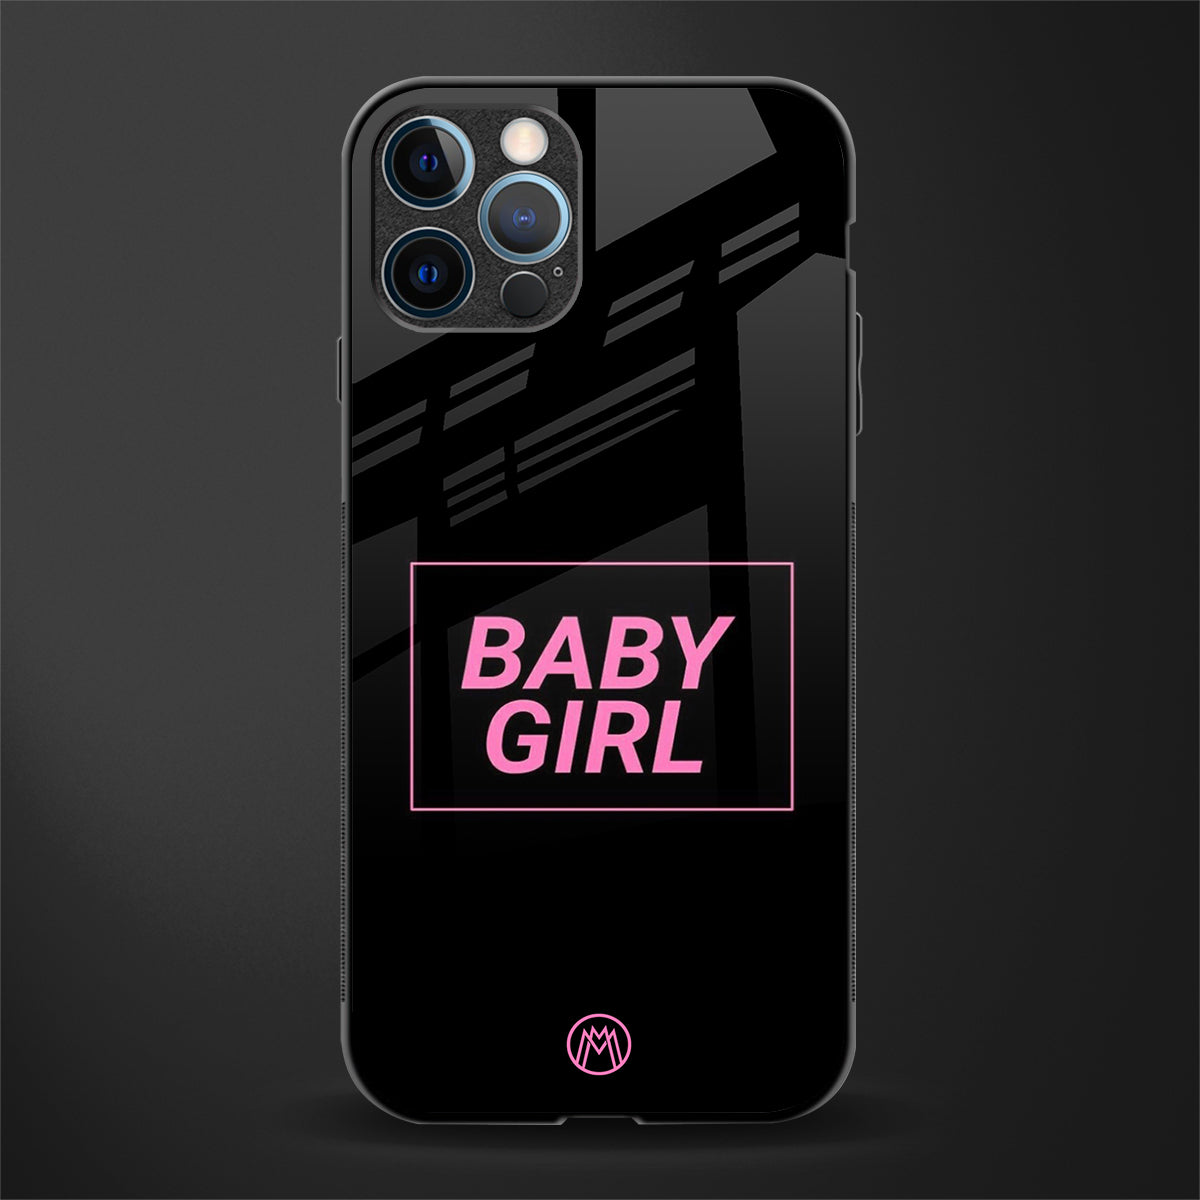 baby girl glass case for iphone 12 pro max image